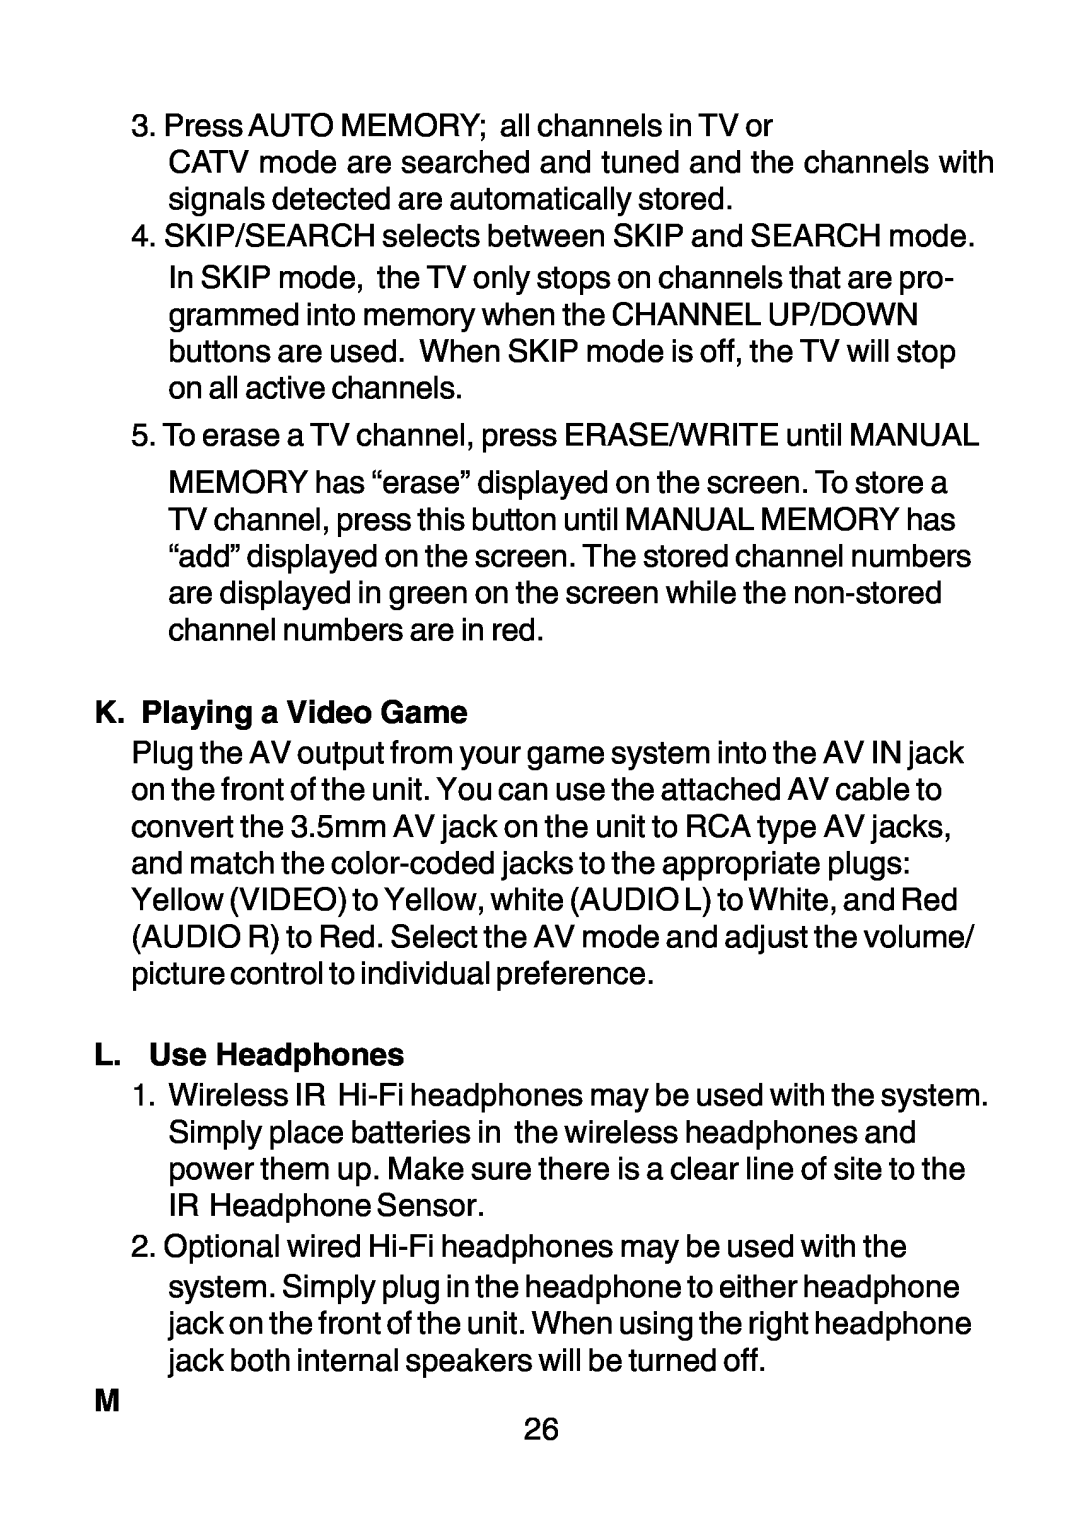 Audiovox D1210 owner manual K. Playing a Video Game, L. Use Headphones 